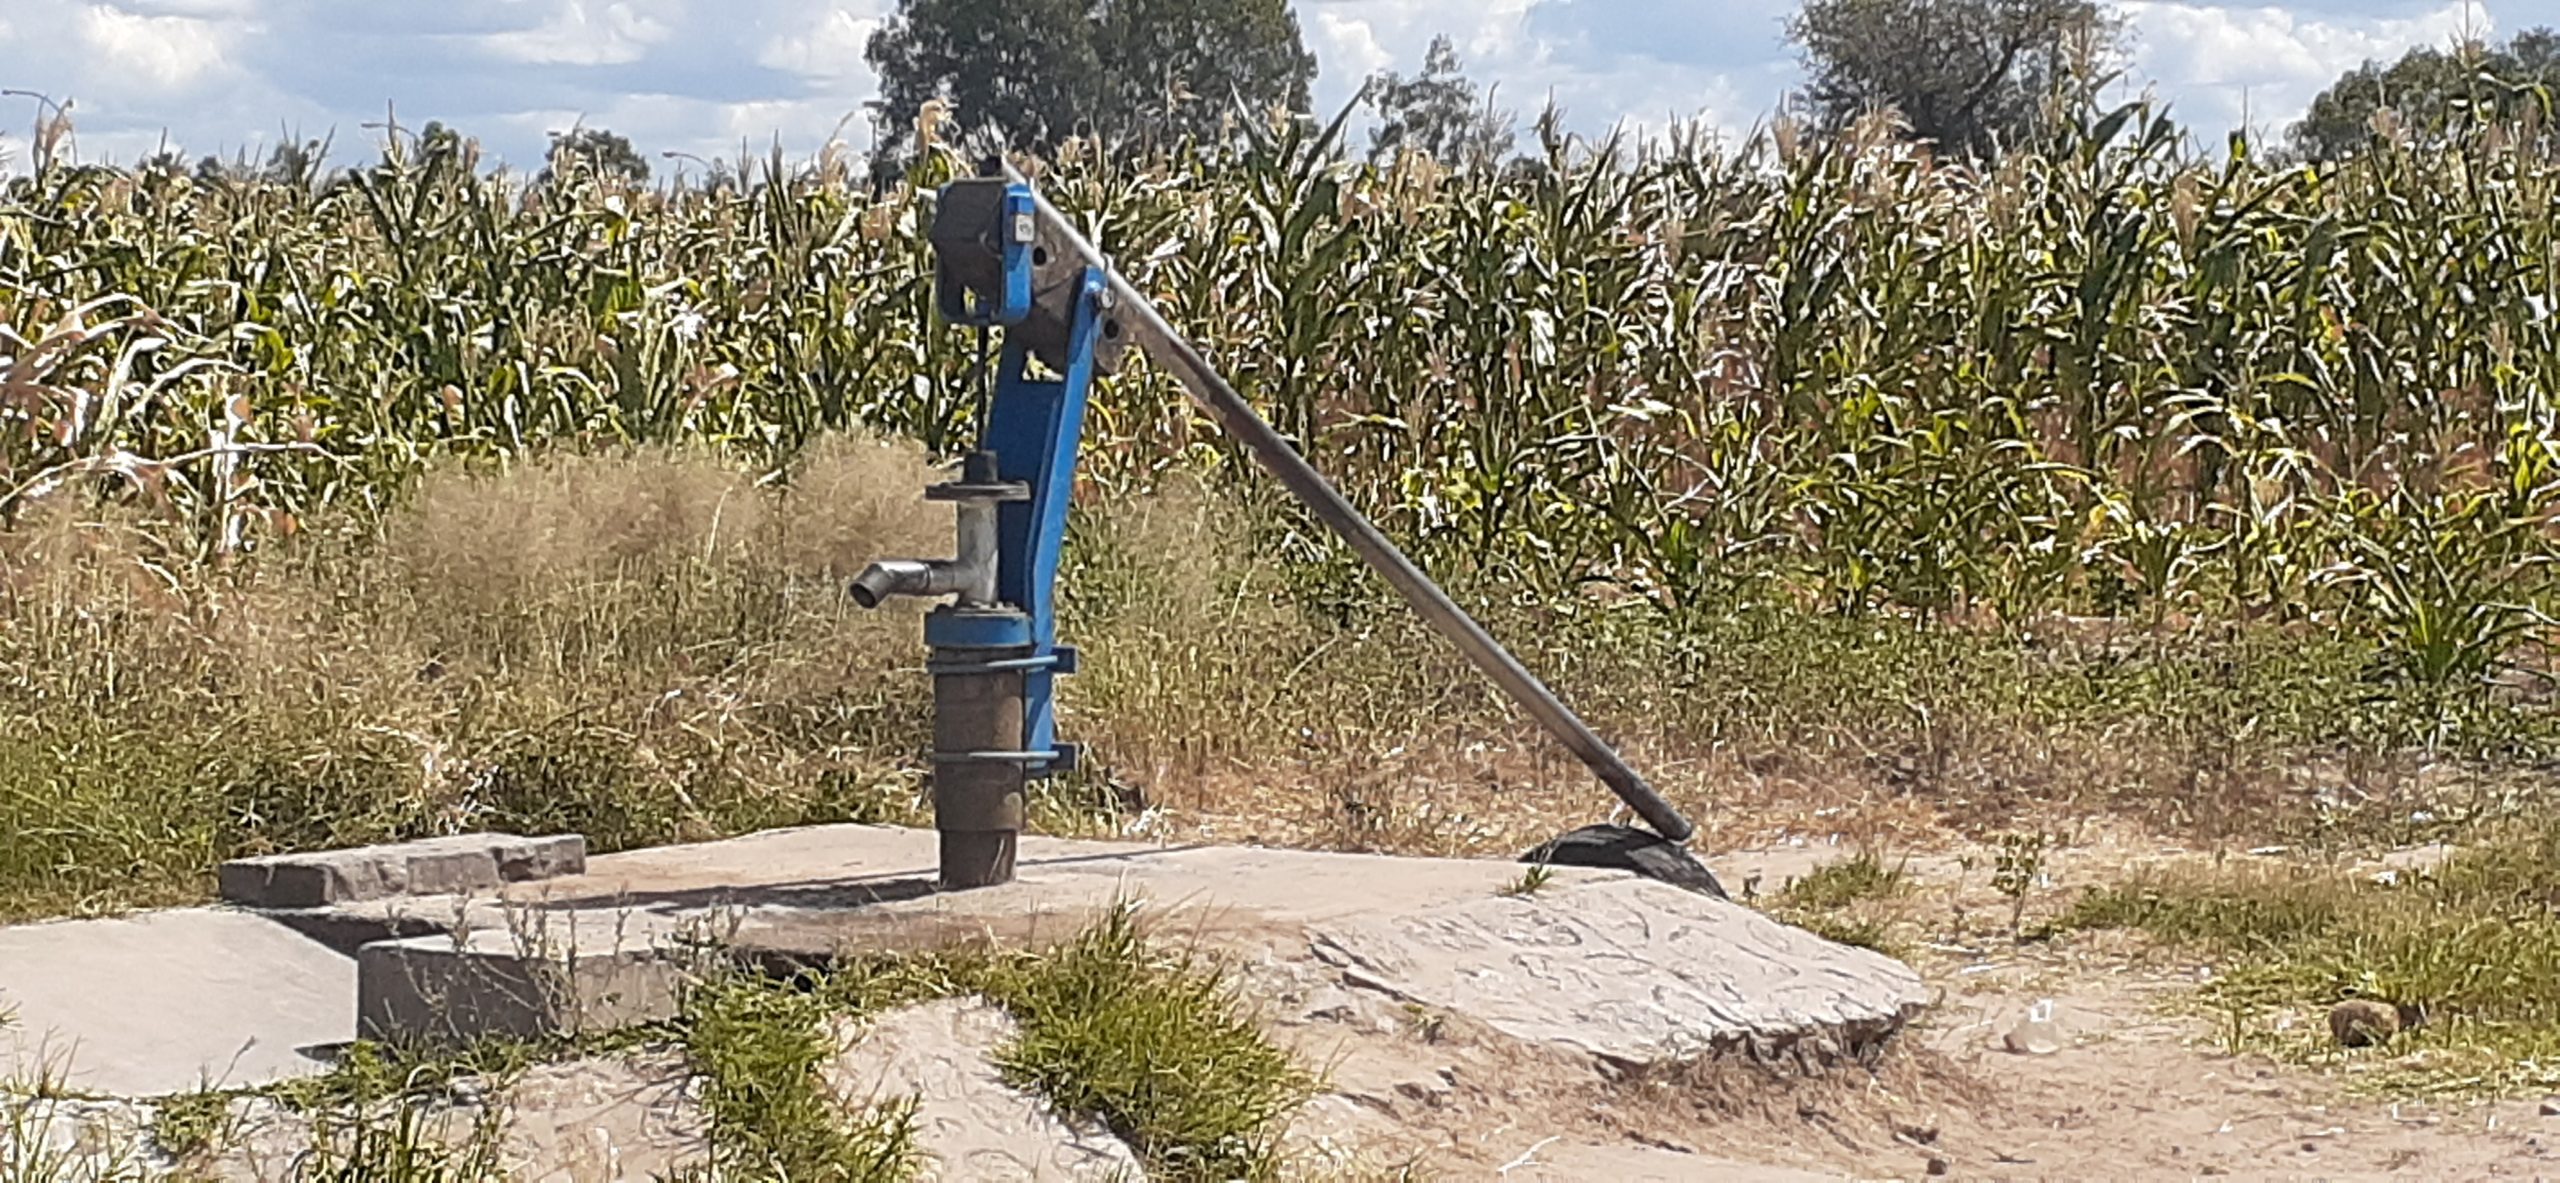 - A.broken down borehole in the middle of a maize field